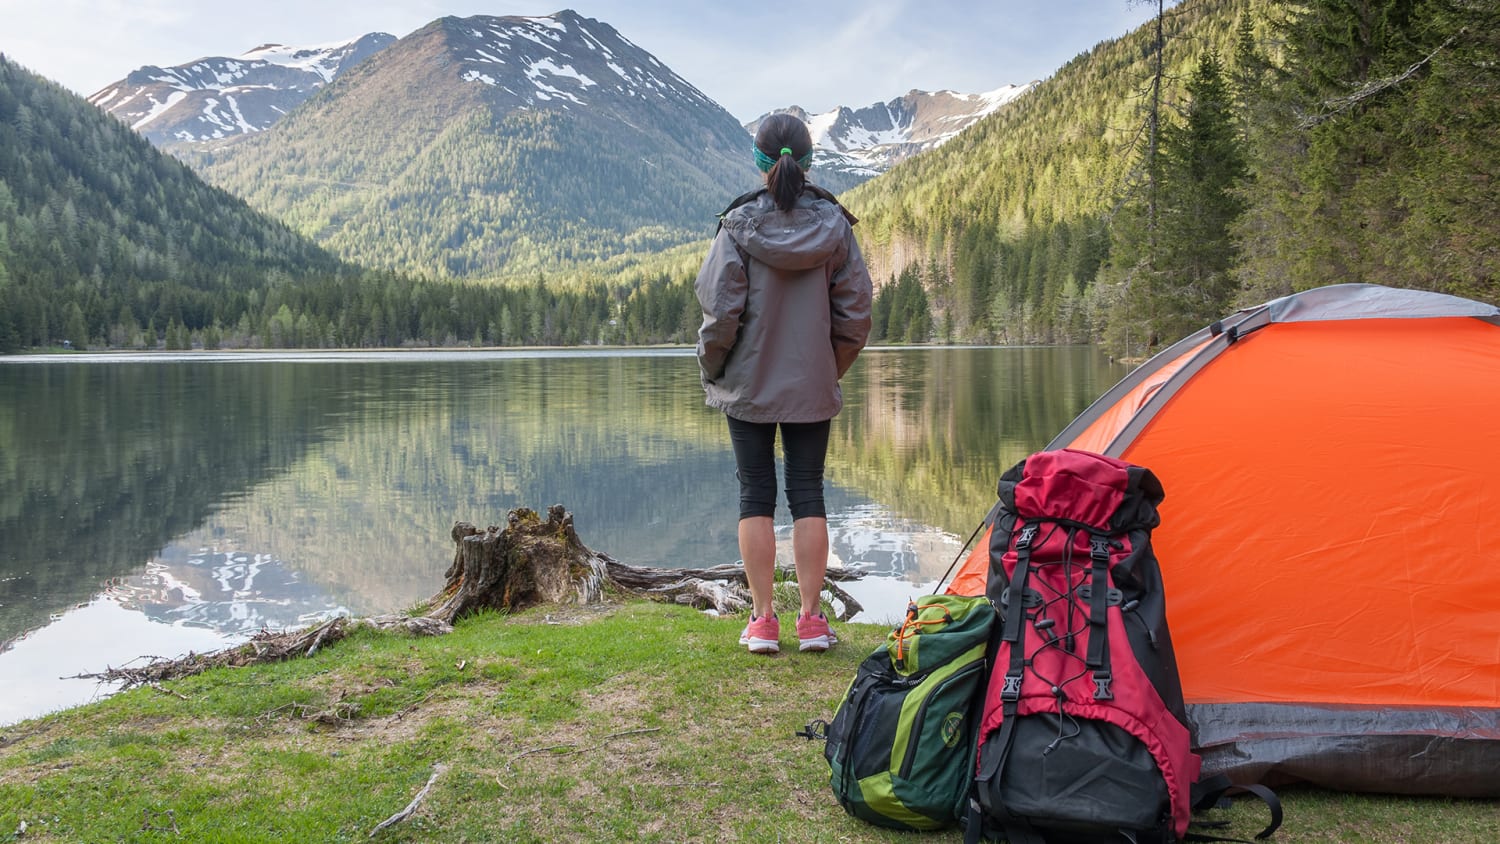 Camping gear you need to pick up before braving nature - TODAY.com